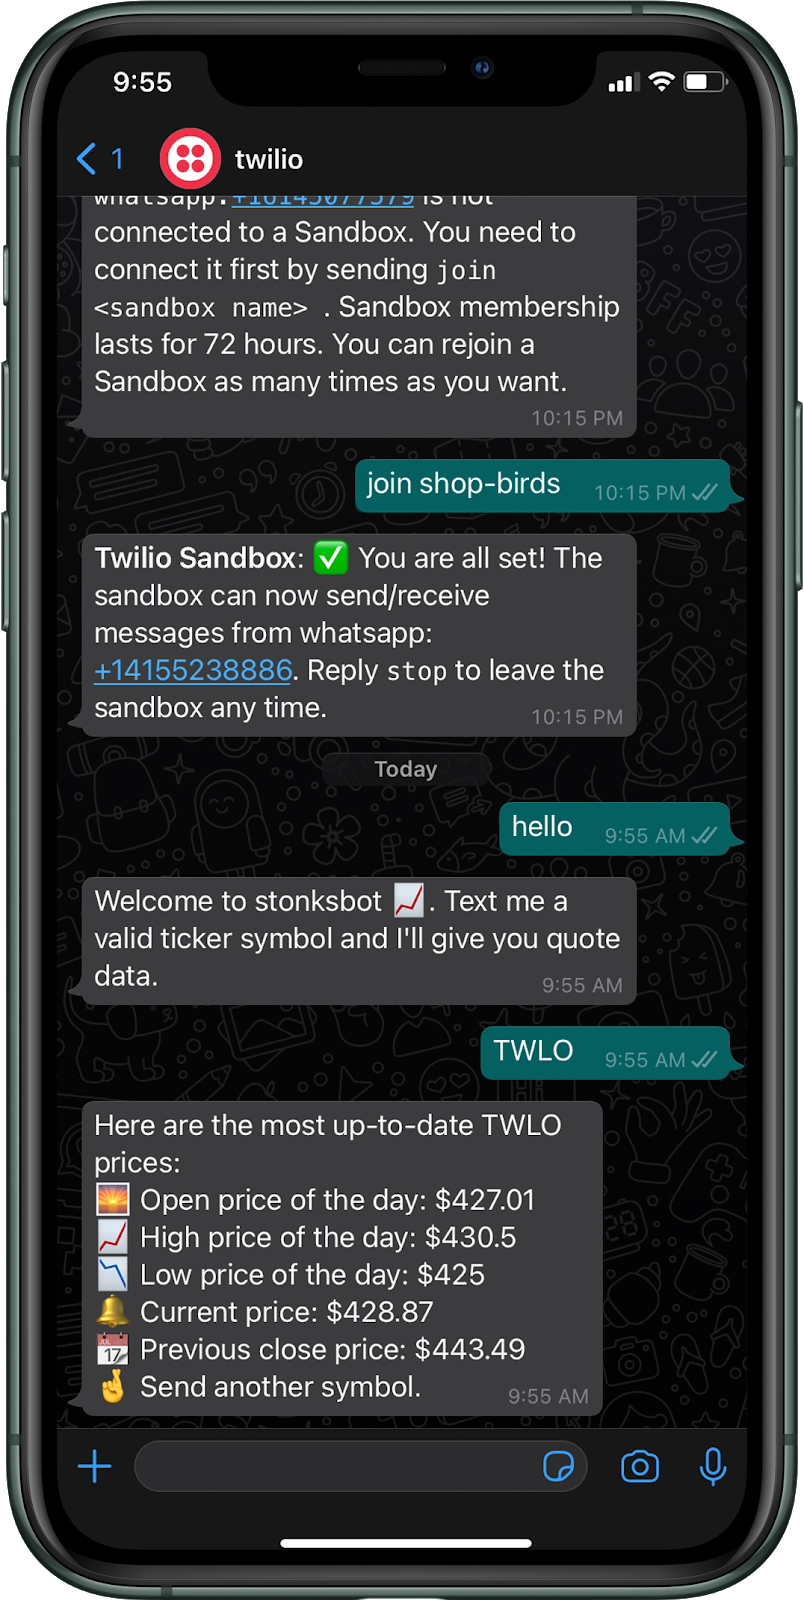 An image of the bot and its response after it has been sent the TWLO ticker symbol